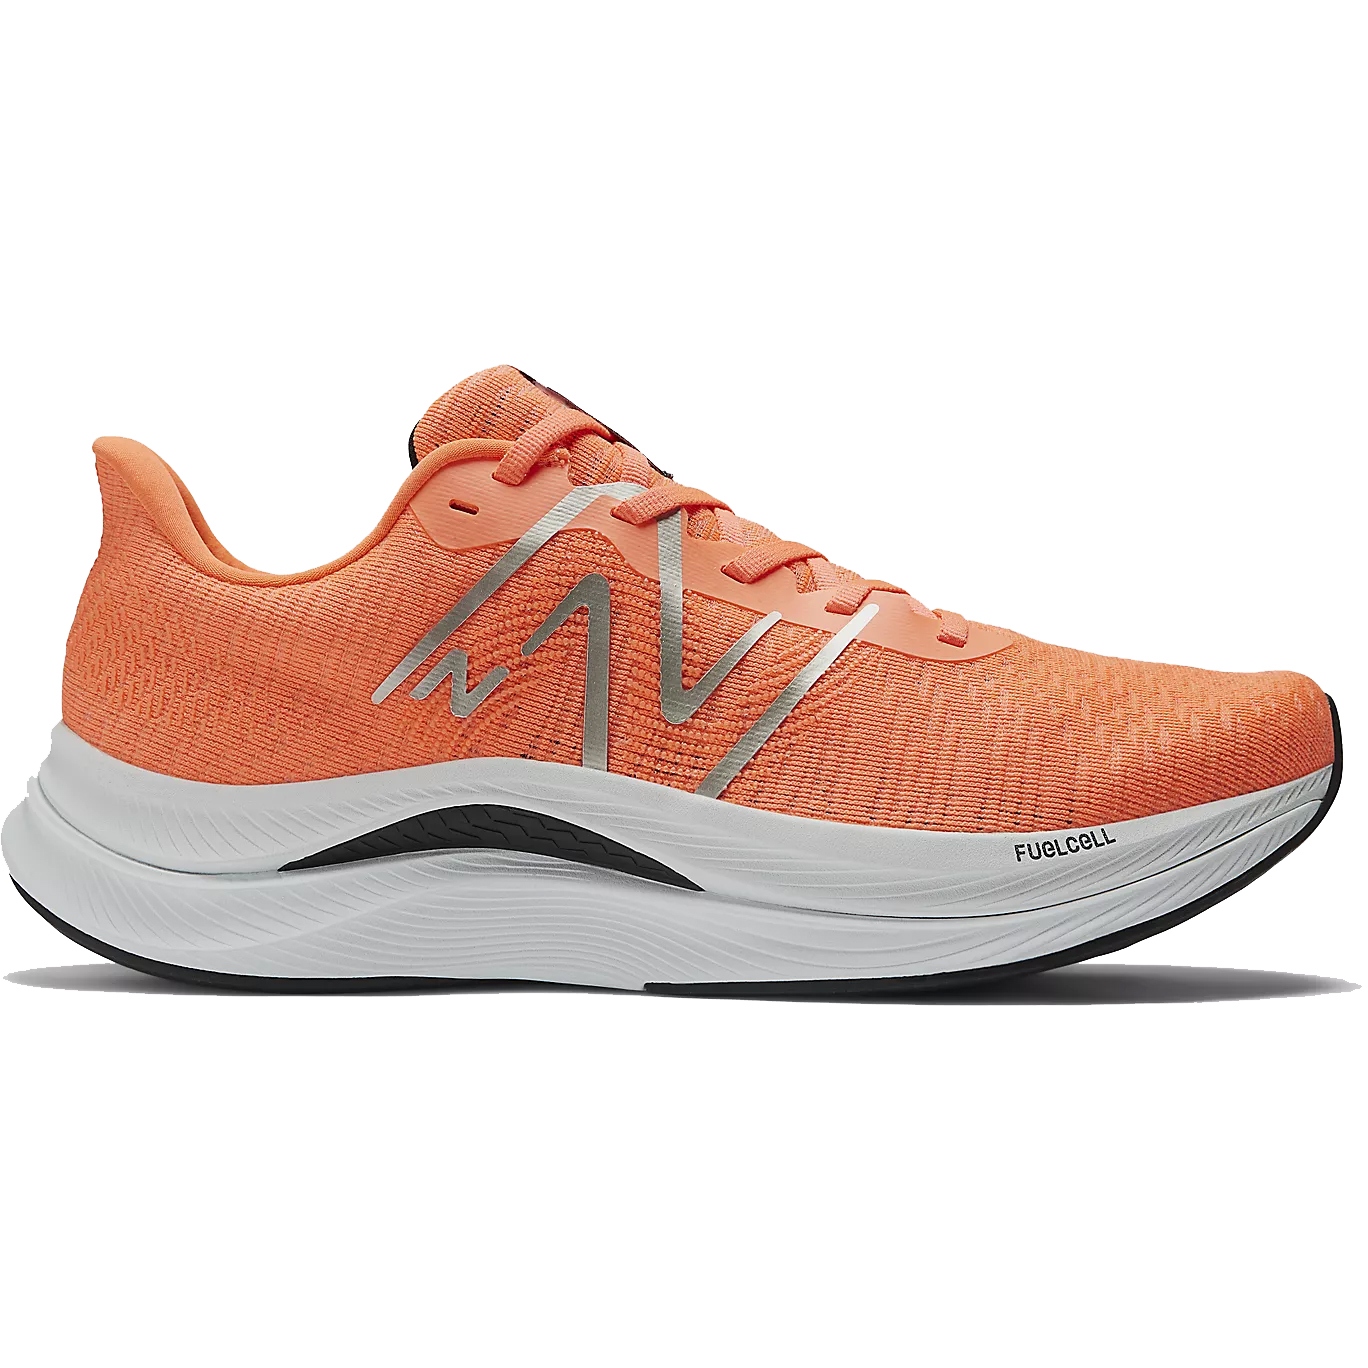 Image de New Balance Chaussures Homme - FuelCell Propel v4 - Neon Dragonfly/Black